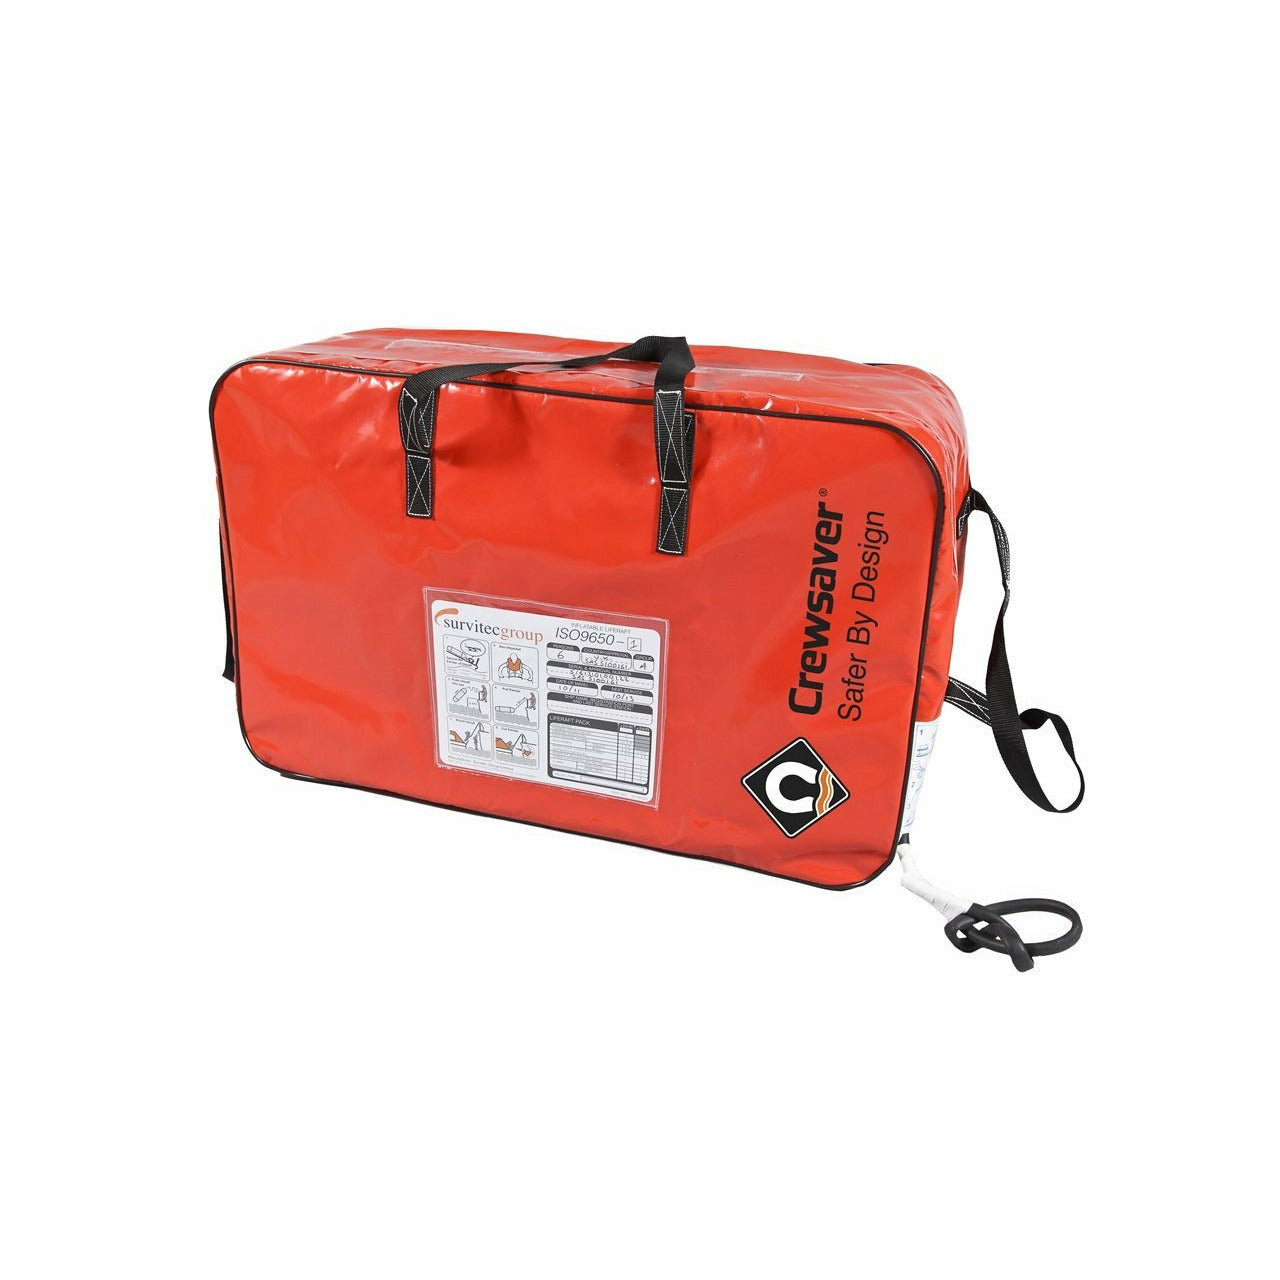 Crewsaver ISO Approved Ocean Life Raft 4 - 12 person - Life Raft Professionals